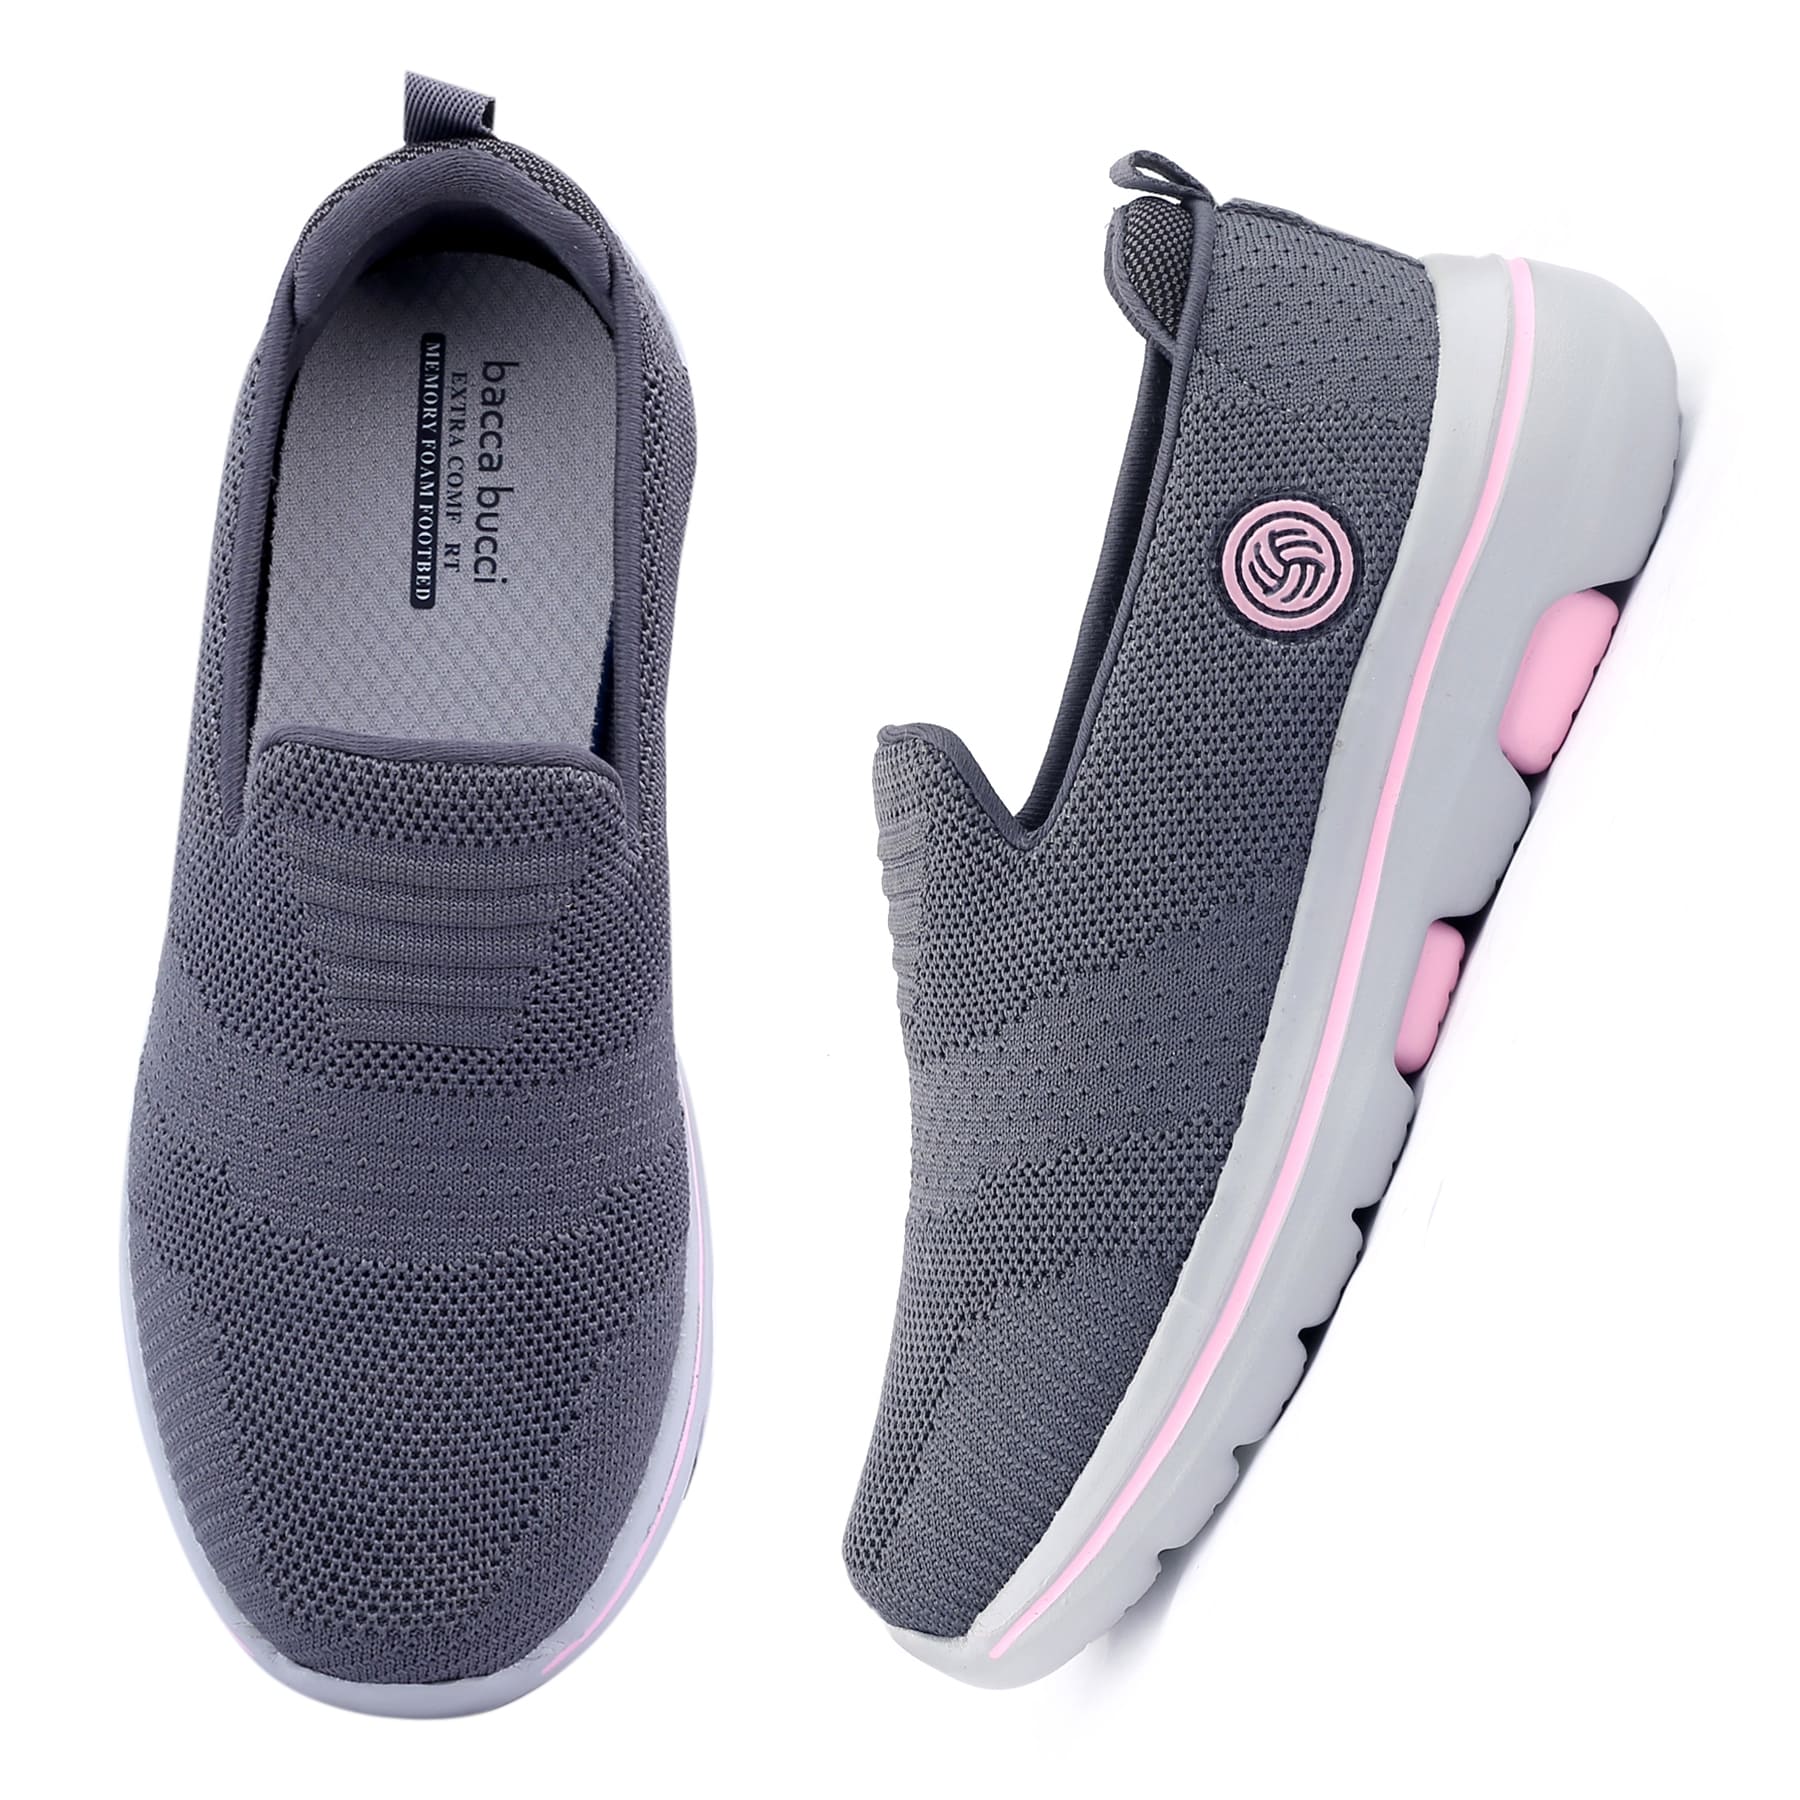 Bacca Bucci NIMBUS Women All-Day wear Joggers Slip-on Walking Shoes with Ortholite Footbed